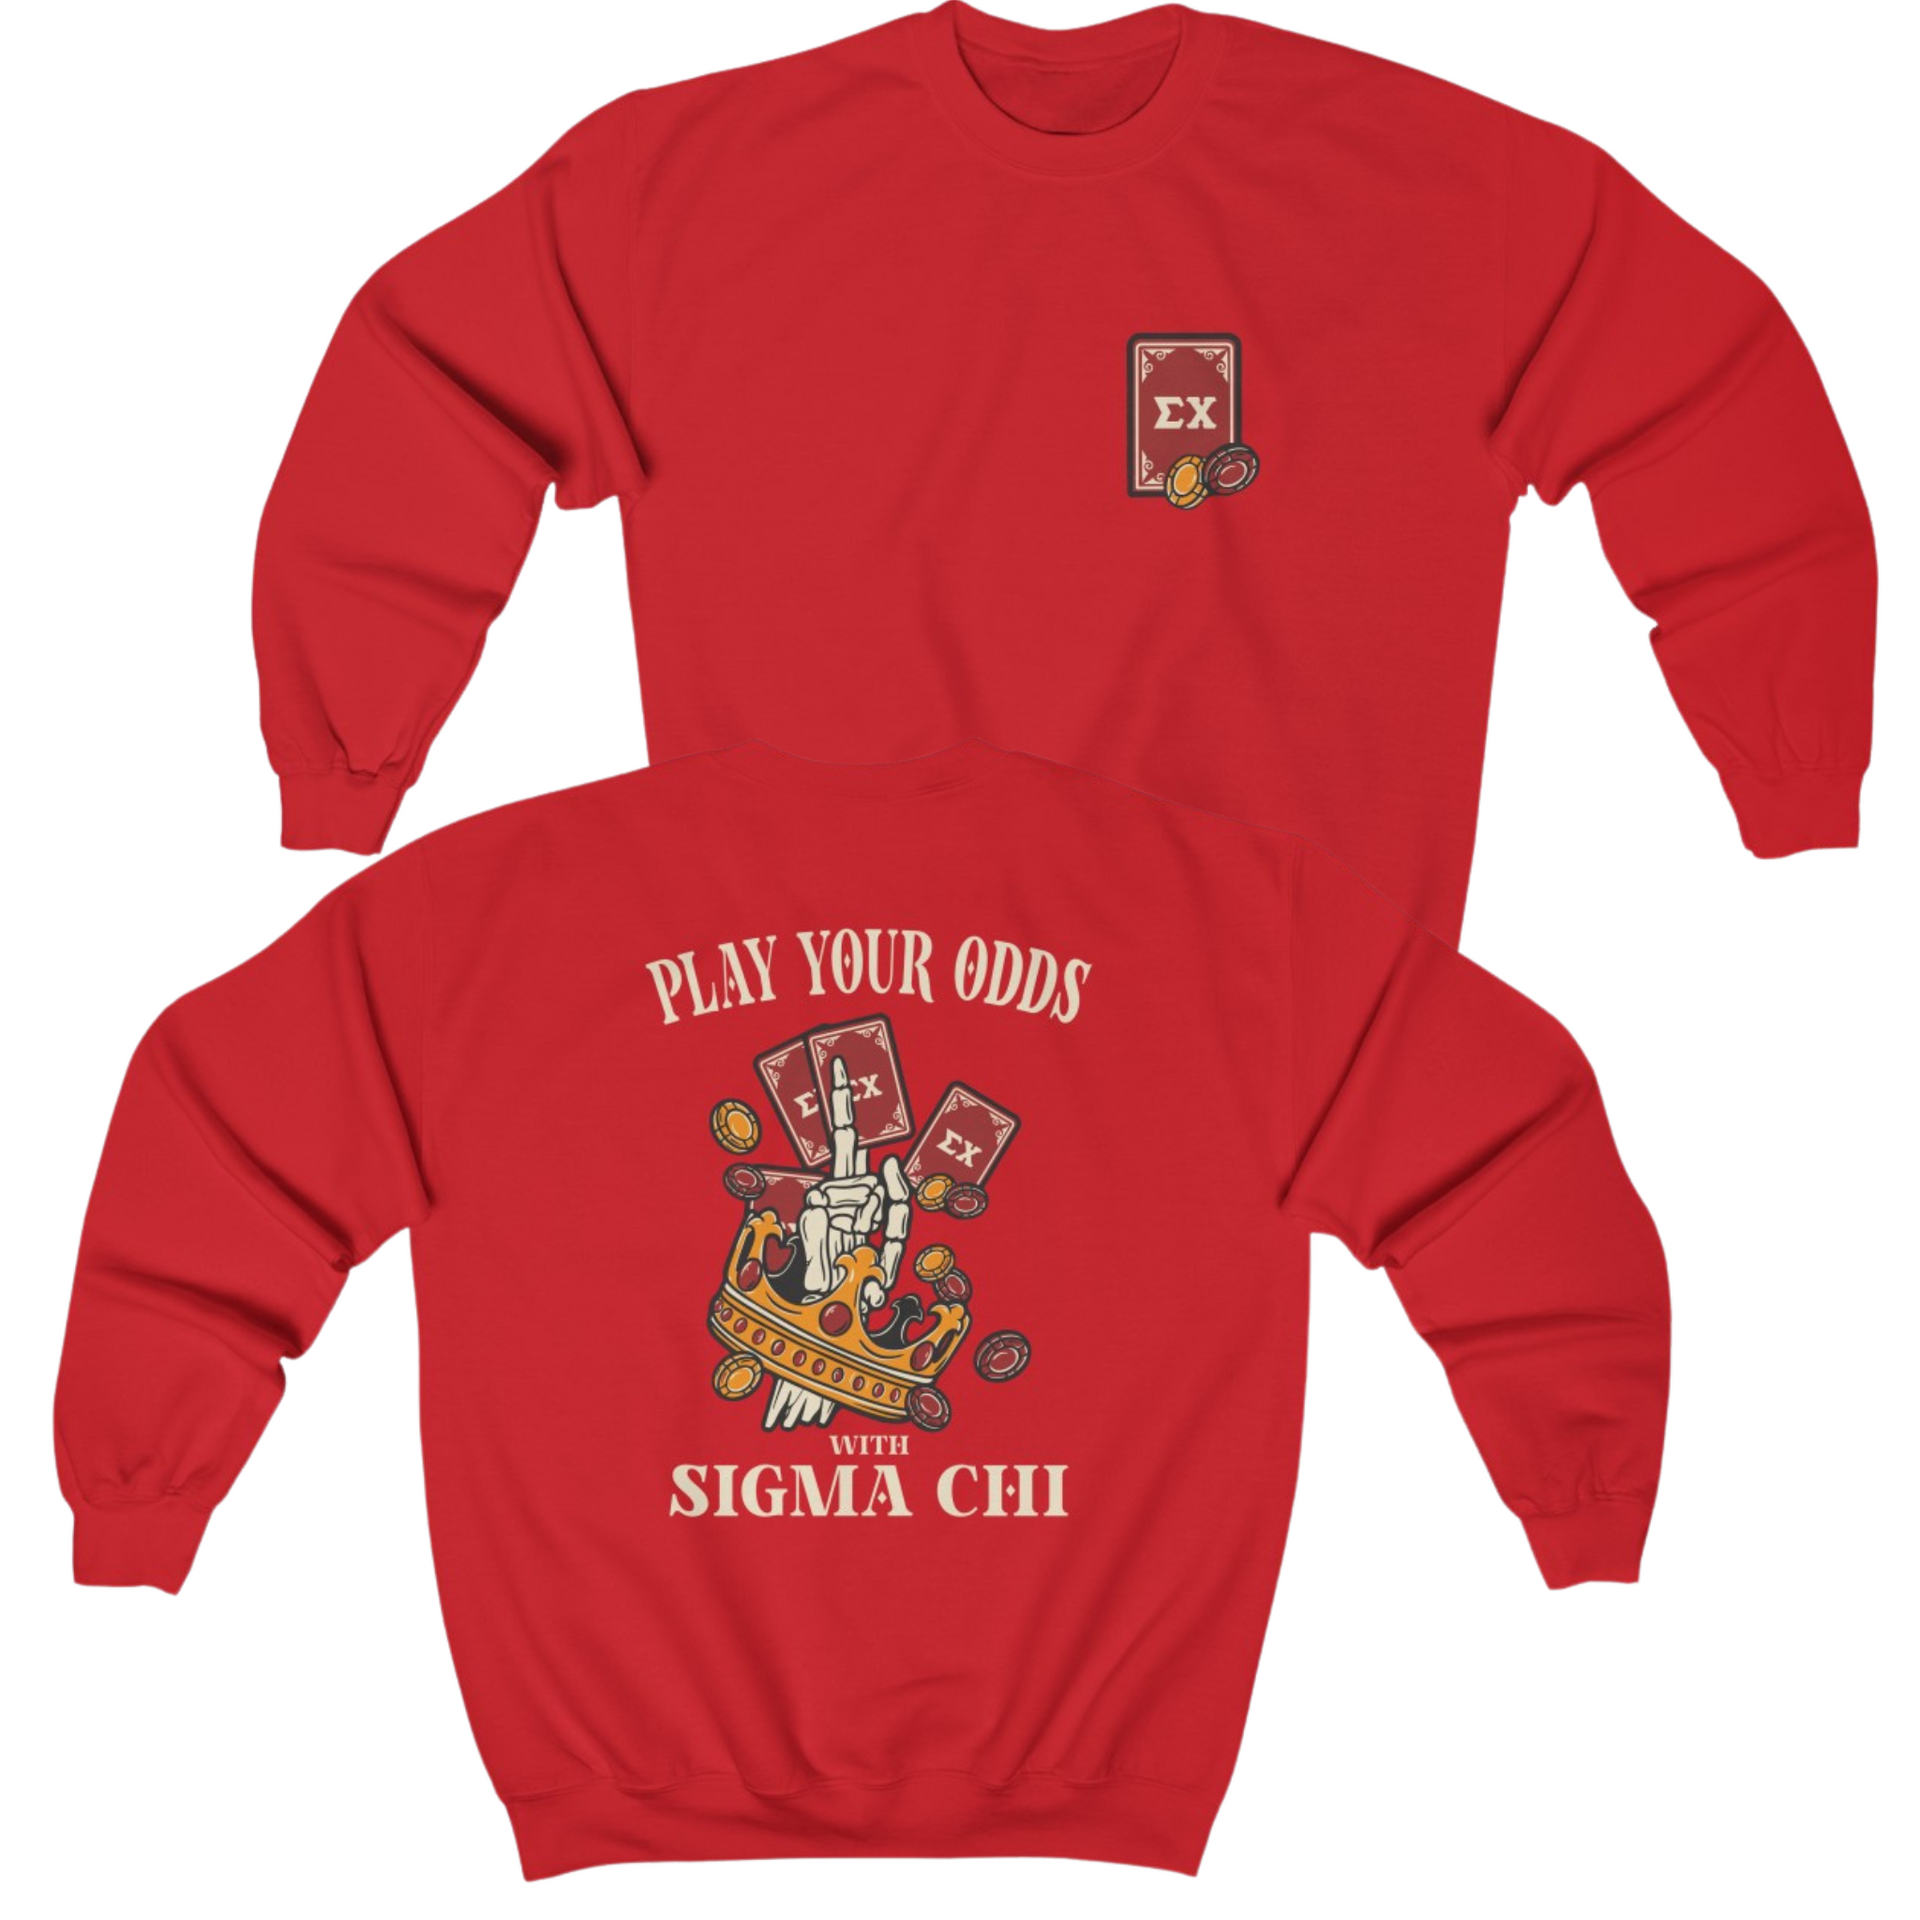 red Sigma Chi Graphic Crewneck Sweatshirt | Play Your Odds | Sigma Chi Fraternity Merch House